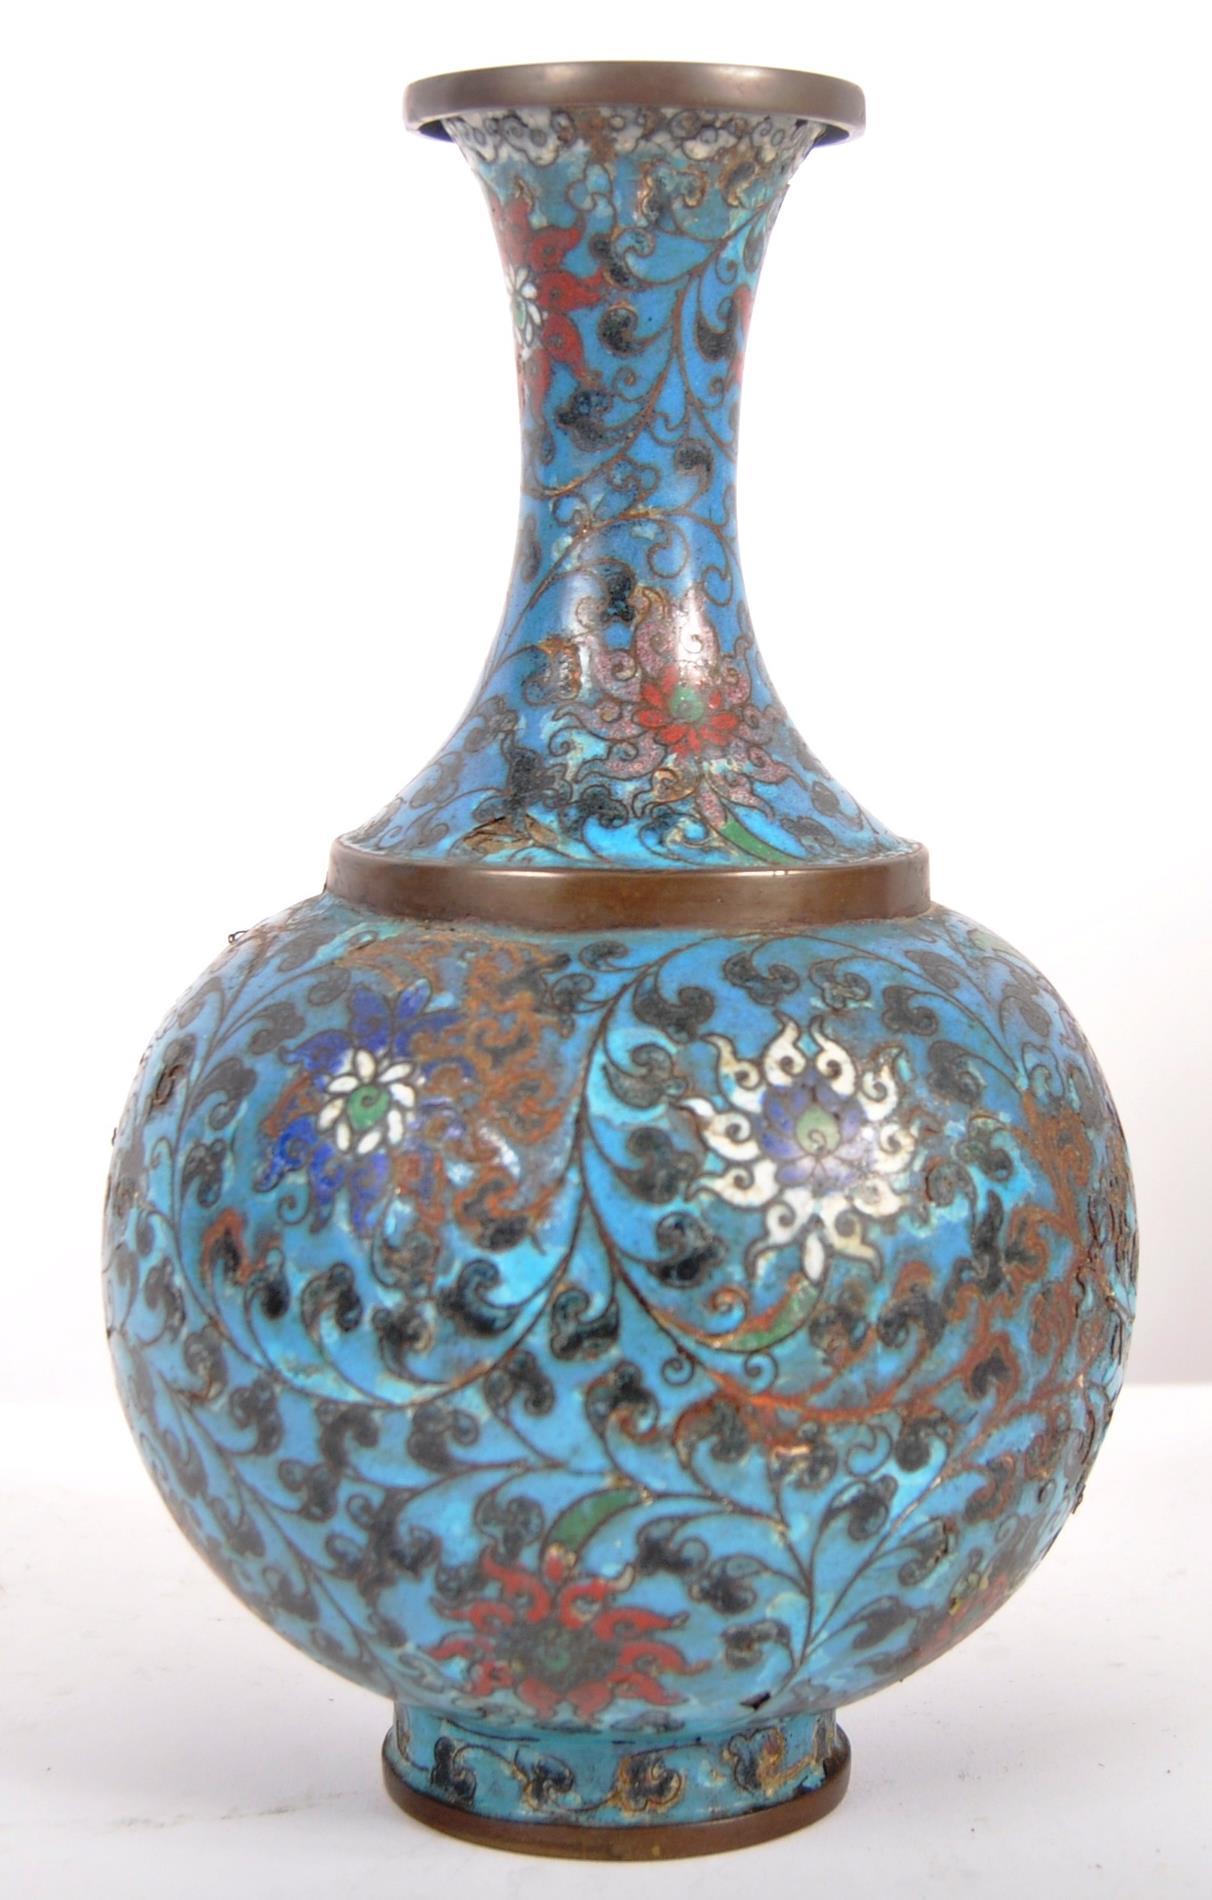 EARLY 20TH CENTURY CHINESE CLOISONNE VASE - Image 3 of 7